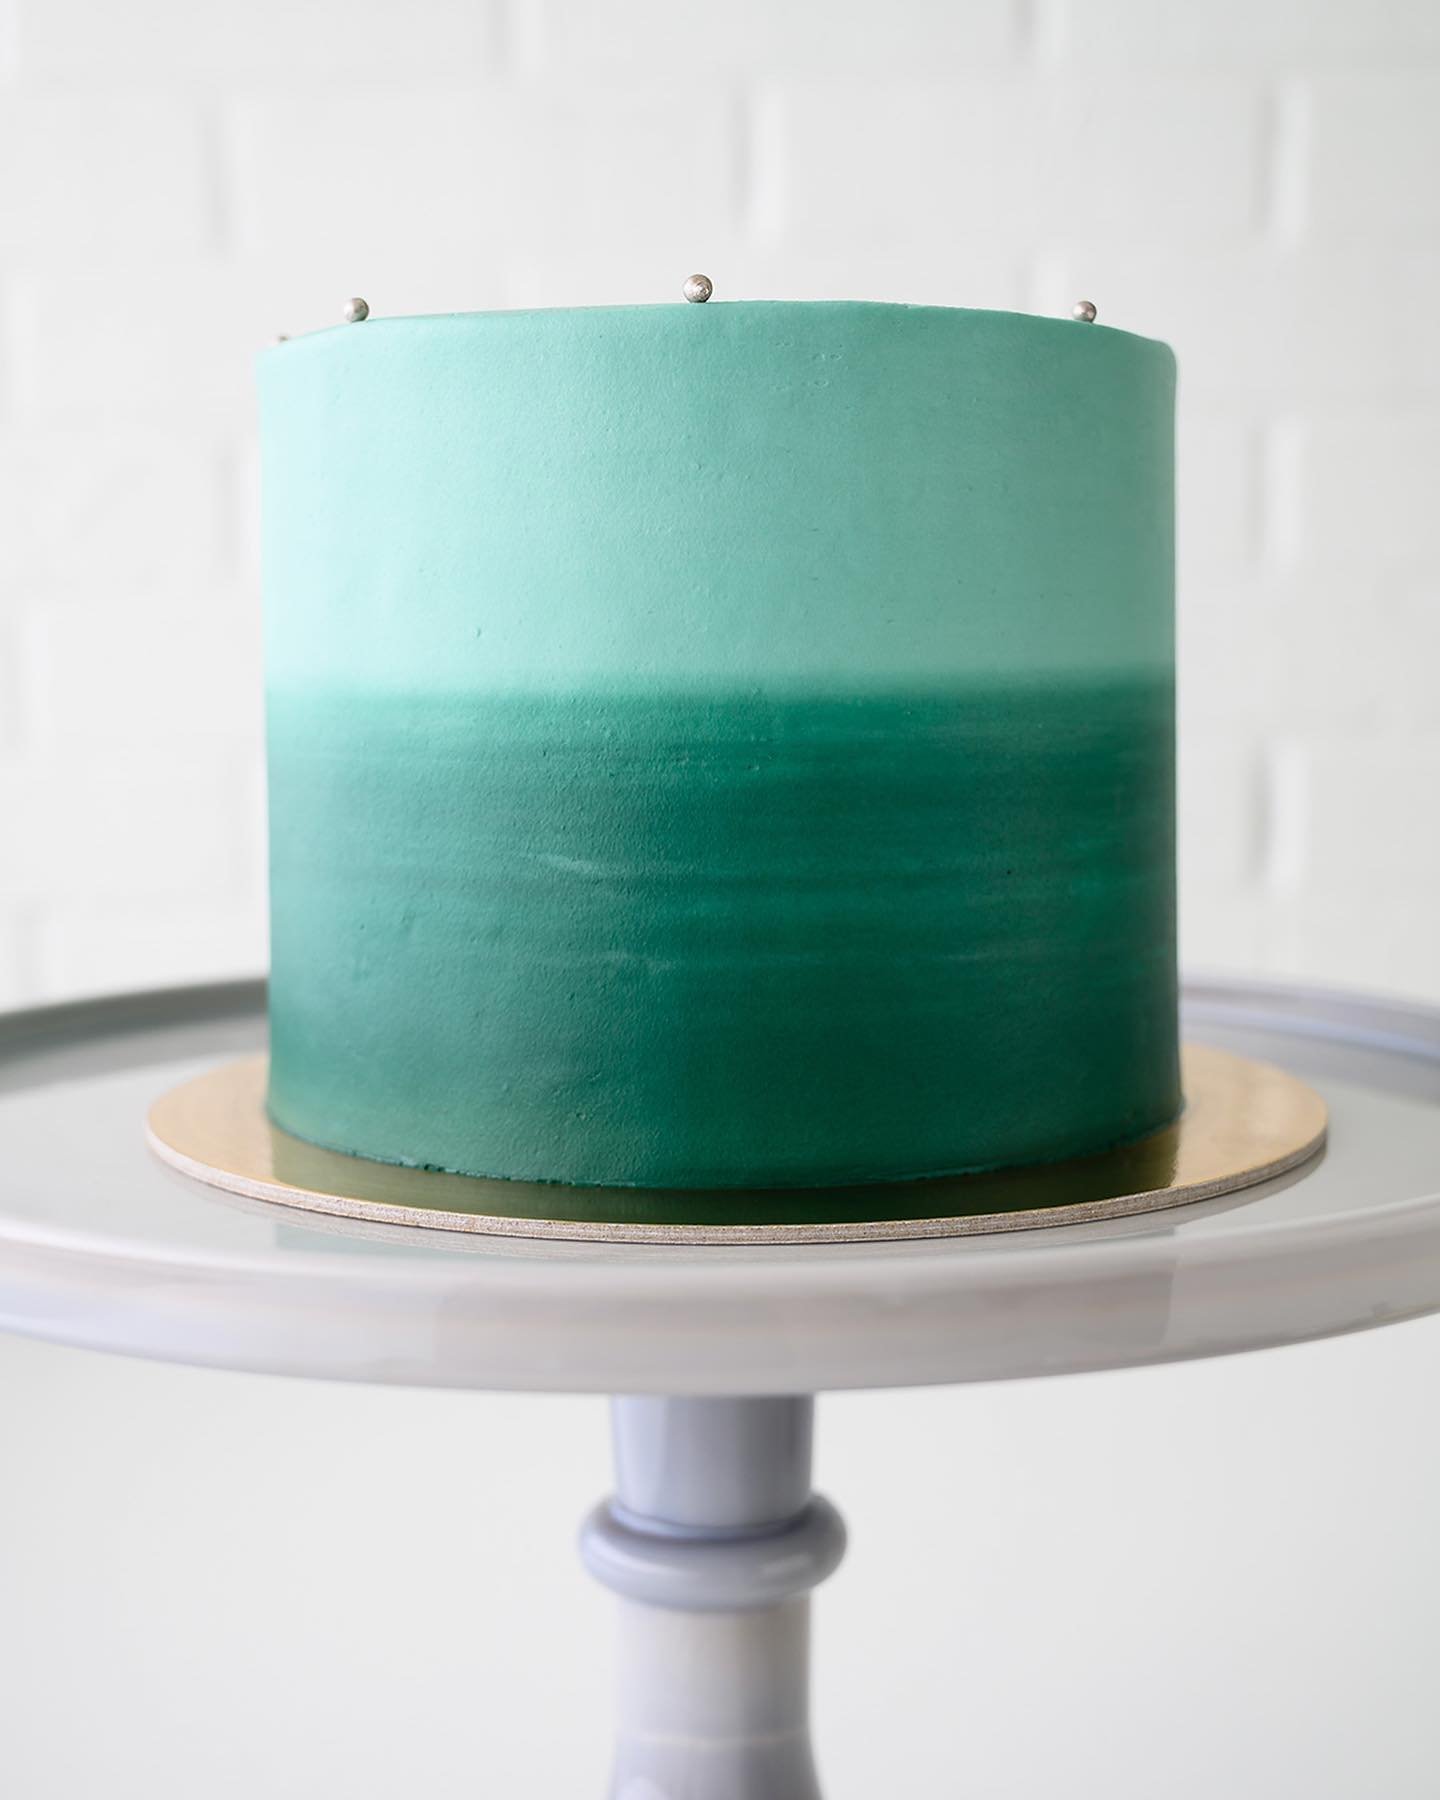 6&rdquo; Tonal Gradient Cake in Forest Green and Silver 🌲🎂💚 Request your next Made-to-Order Cake at the link in bio.